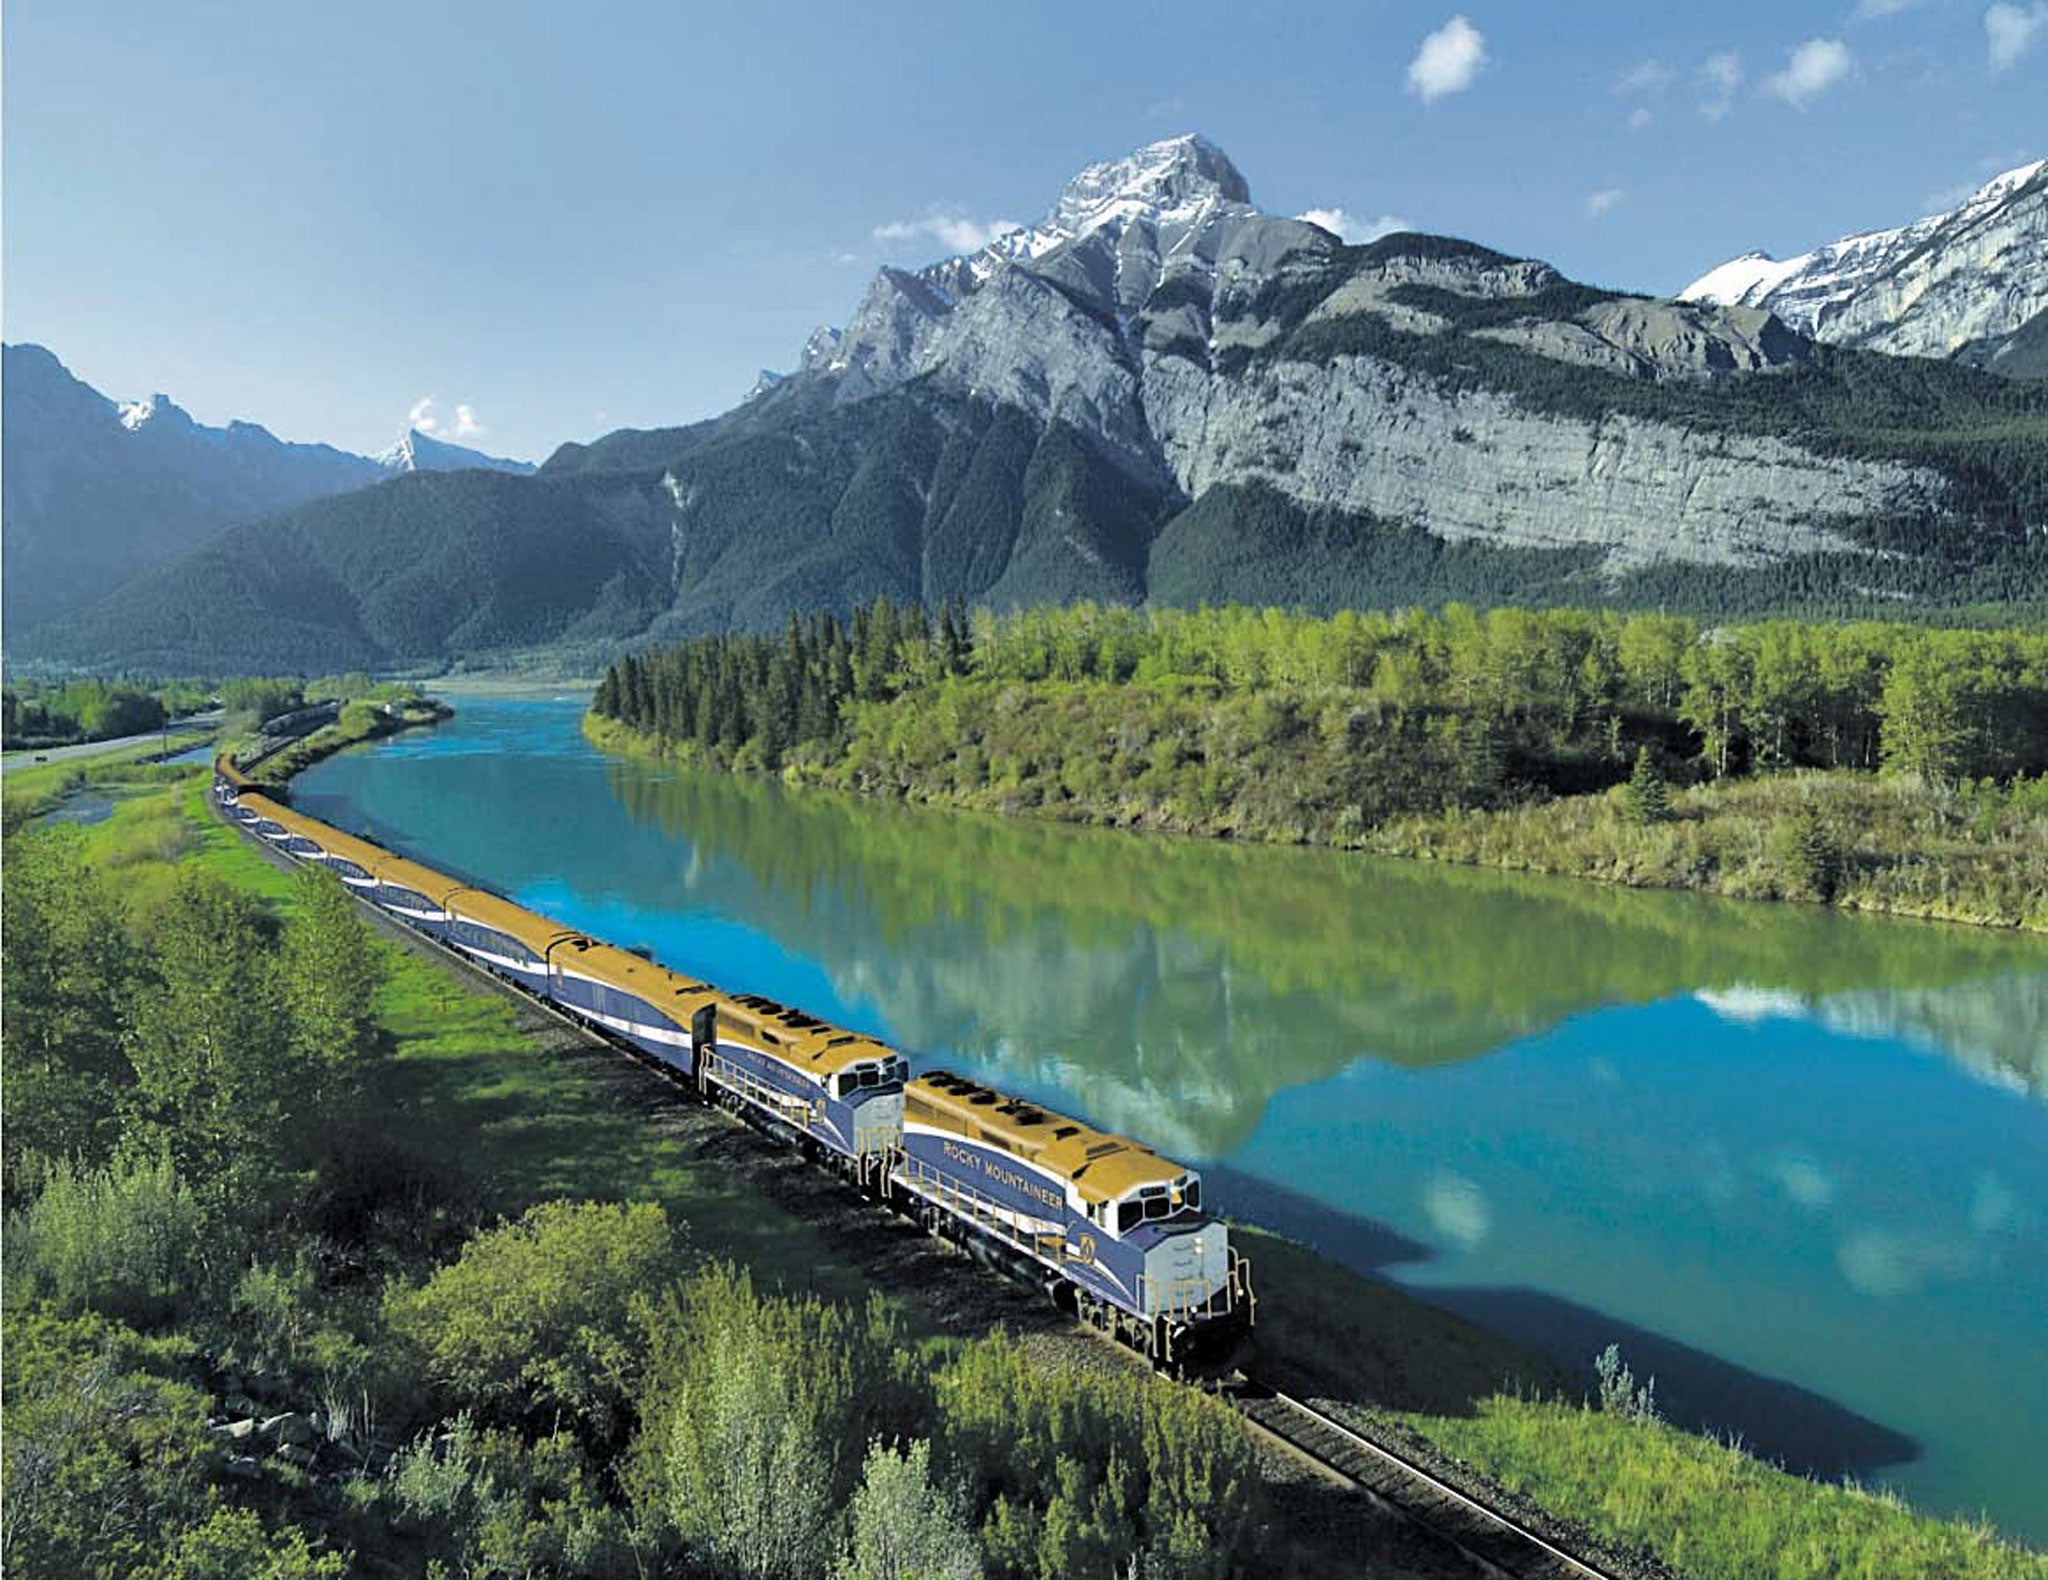 Take a train trip with The Rocky Mountaineer